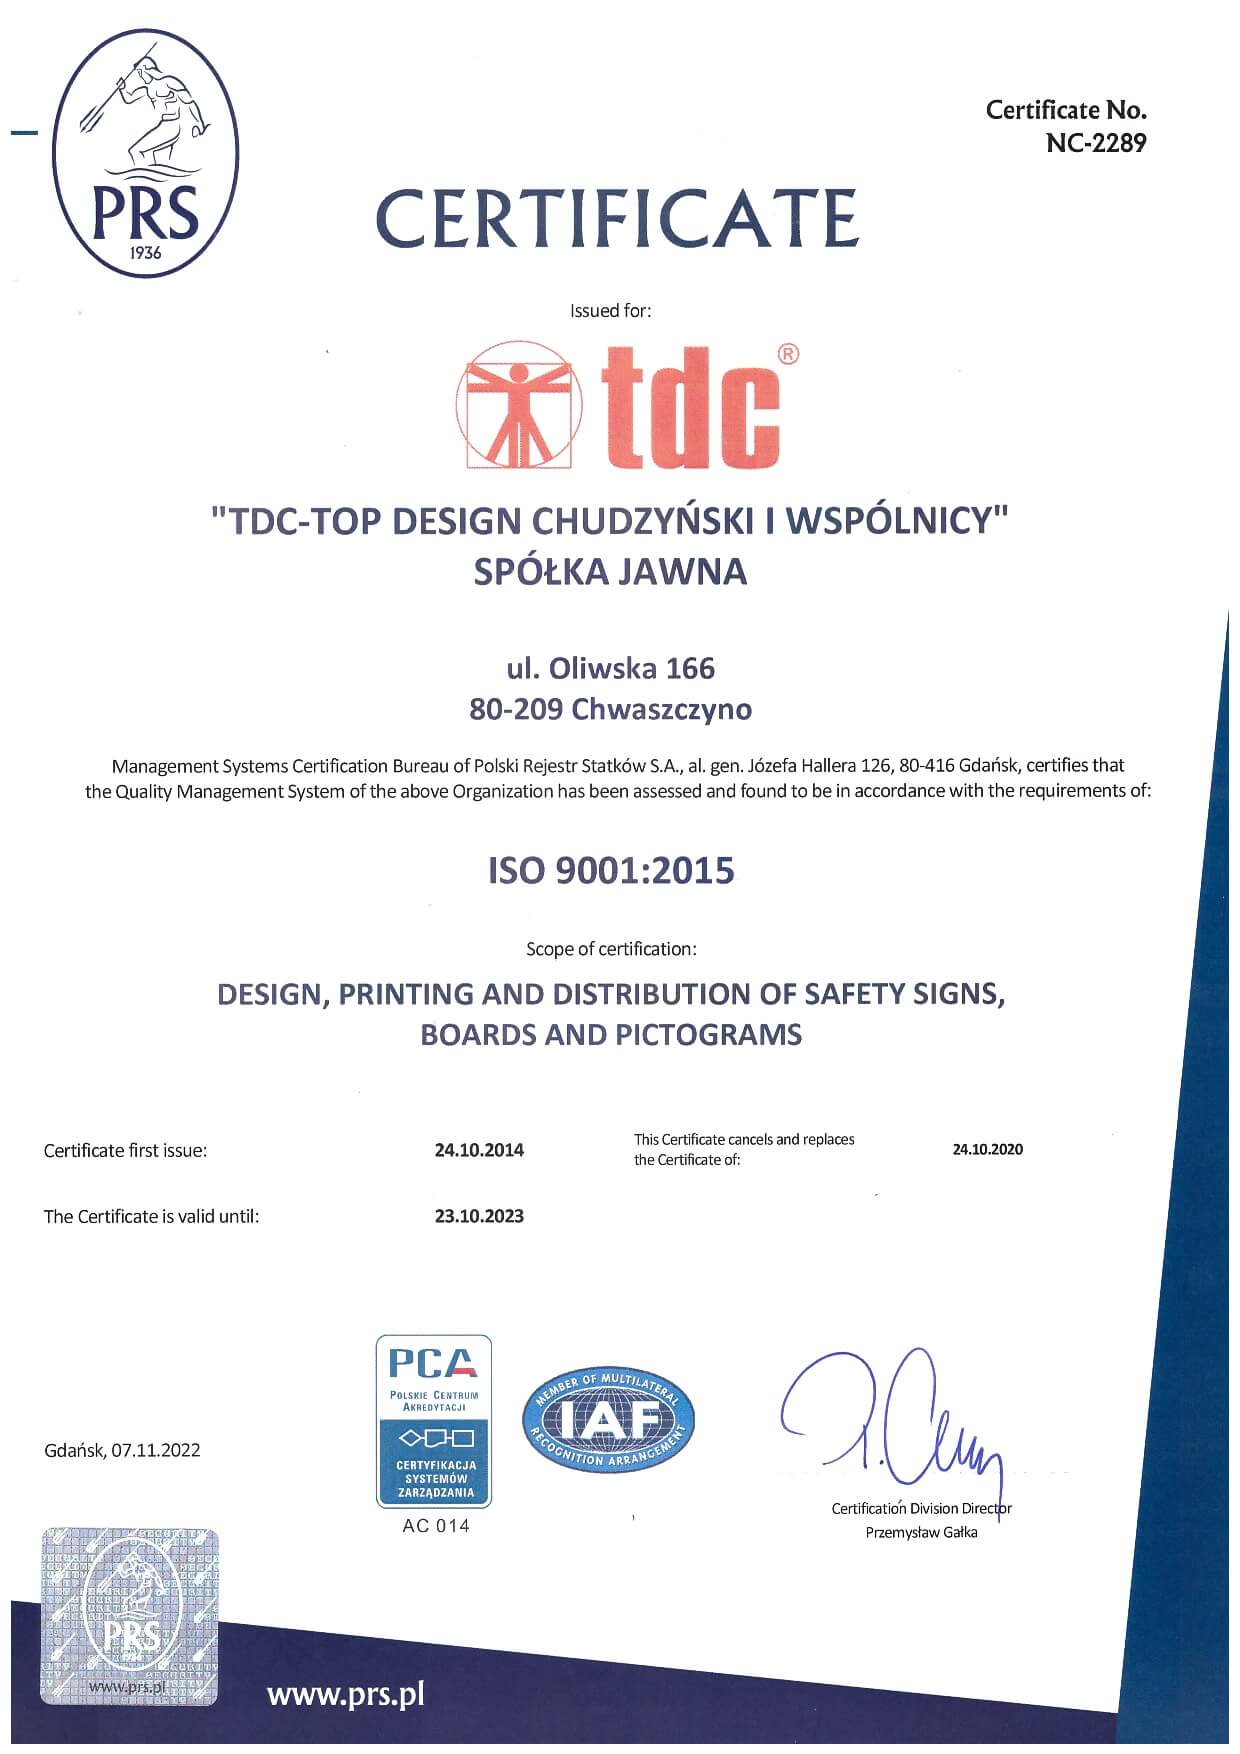 The signs we produce are certified by the leading certification institutes